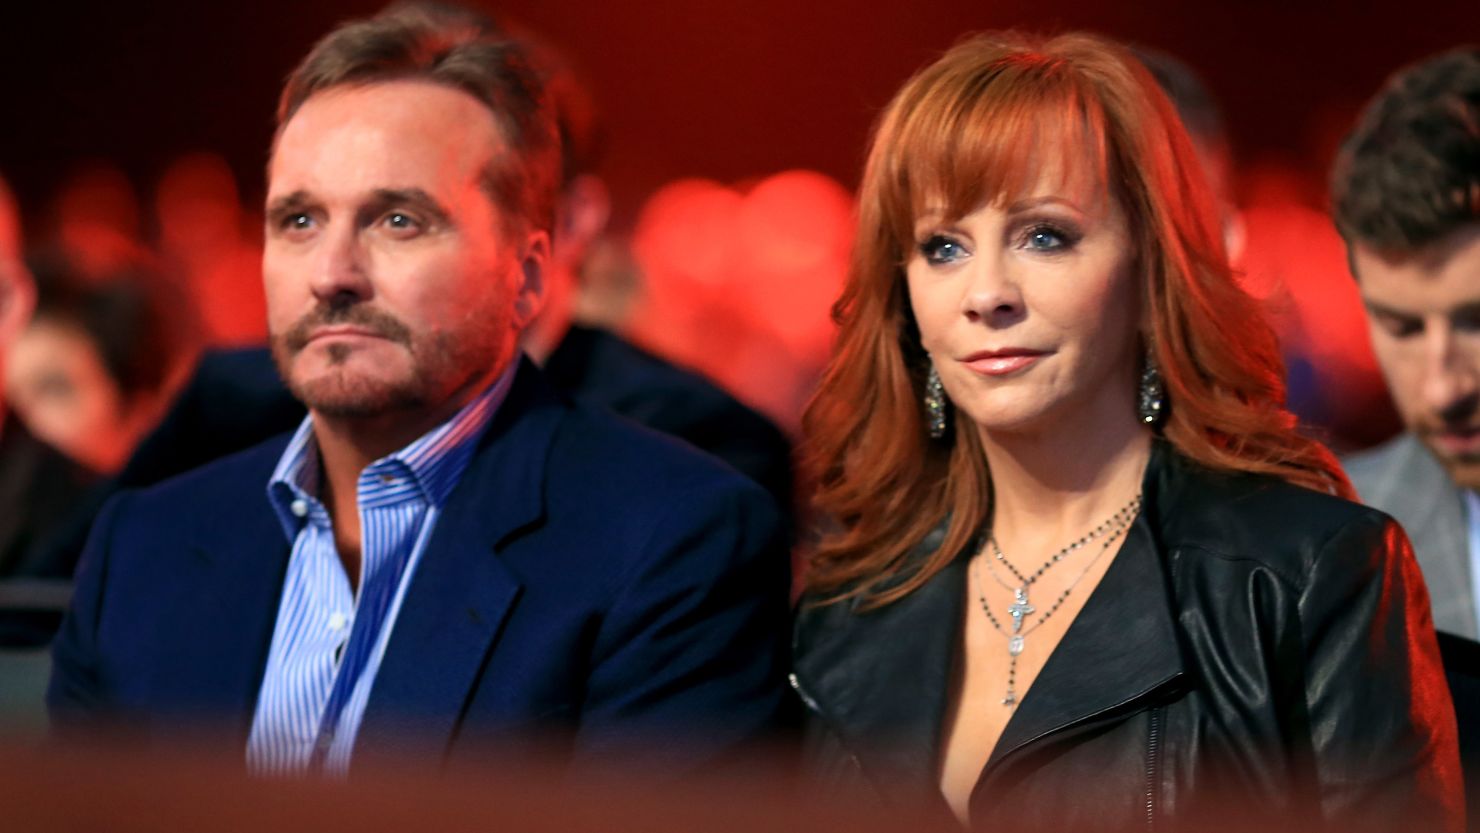 Narvel Blackstock and Reba McEntire announced Monday that they will divorce.